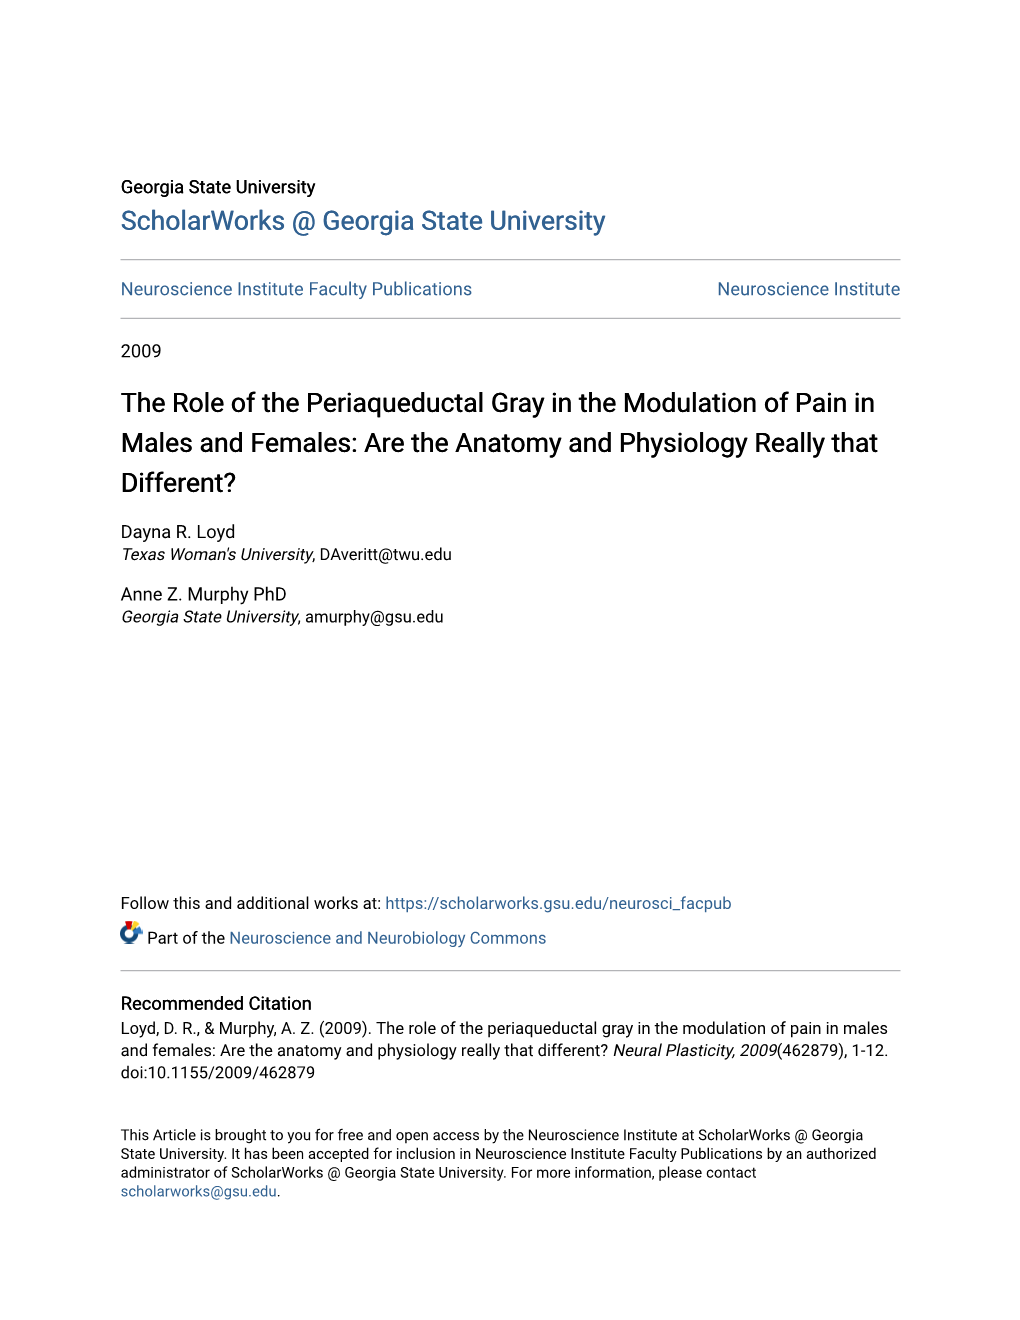 The Role of the Periaqueductal Gray in the Modulation of Pain in Males and Females: Are the Anatomy and Physiology Really That Different?